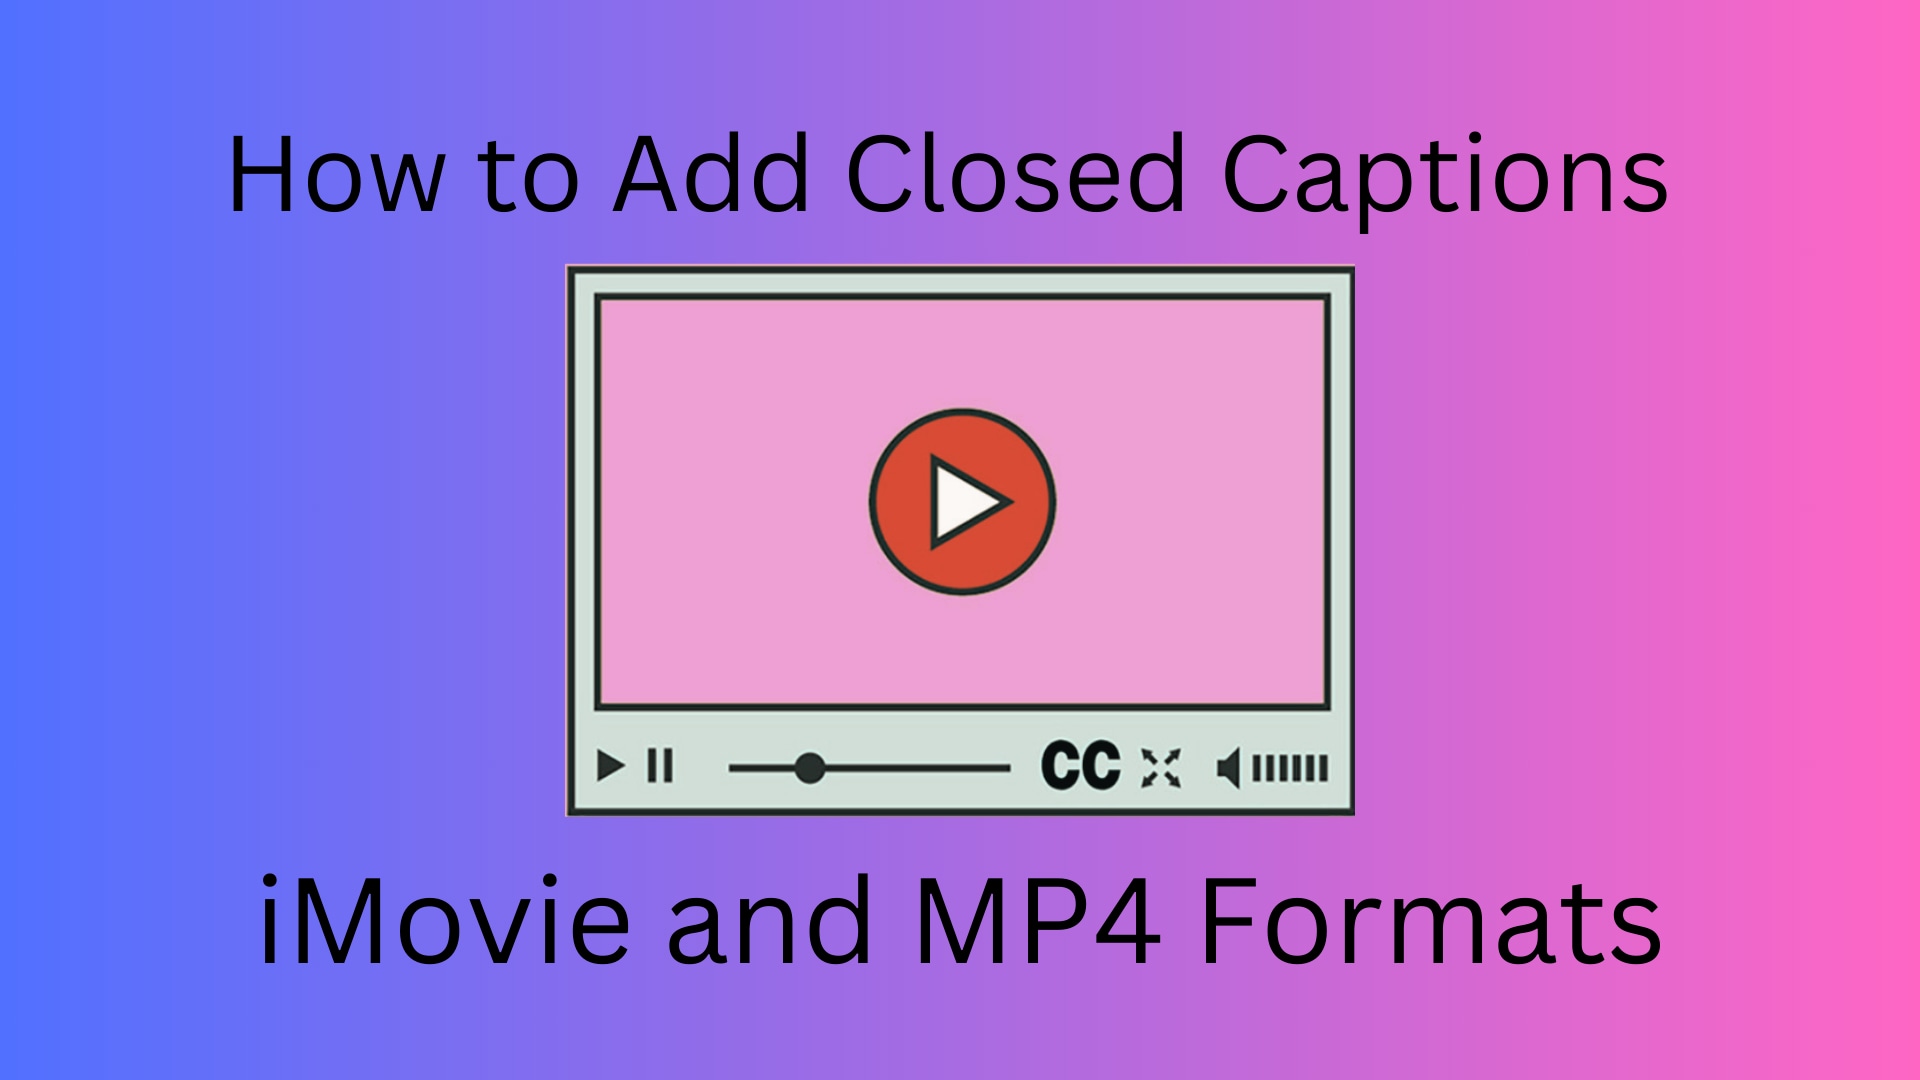 How to Add Closed Captions to Your Video in iMovie and MP4 Formats